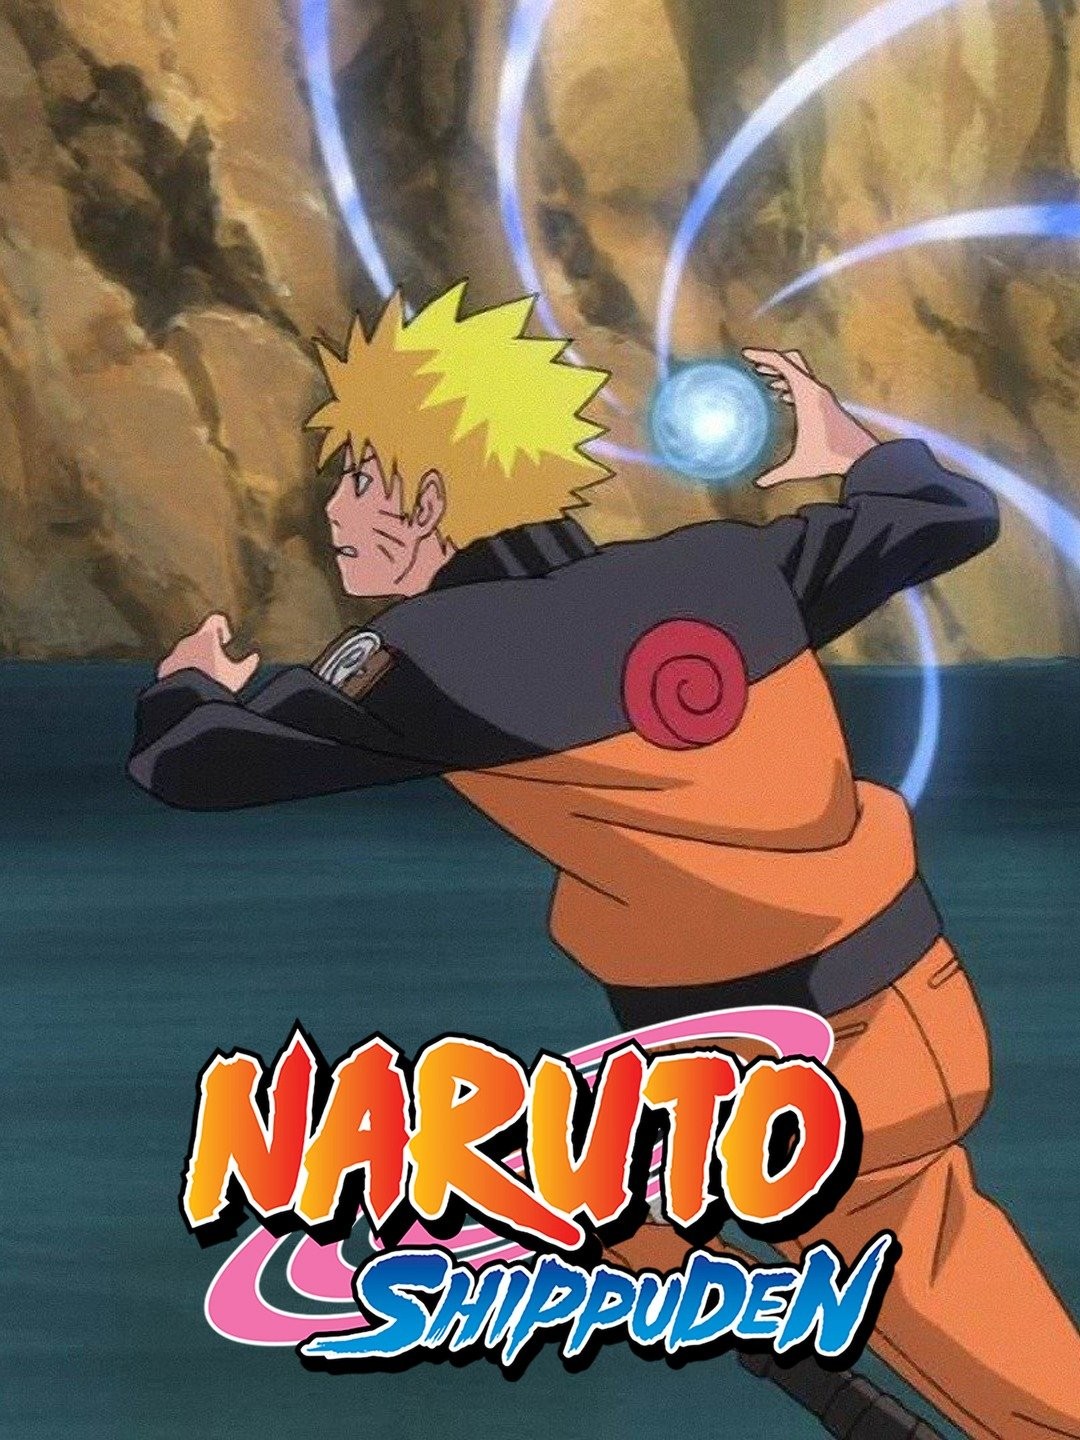 Countdown to the ultimate showdown: Top 10 fights in Naruto